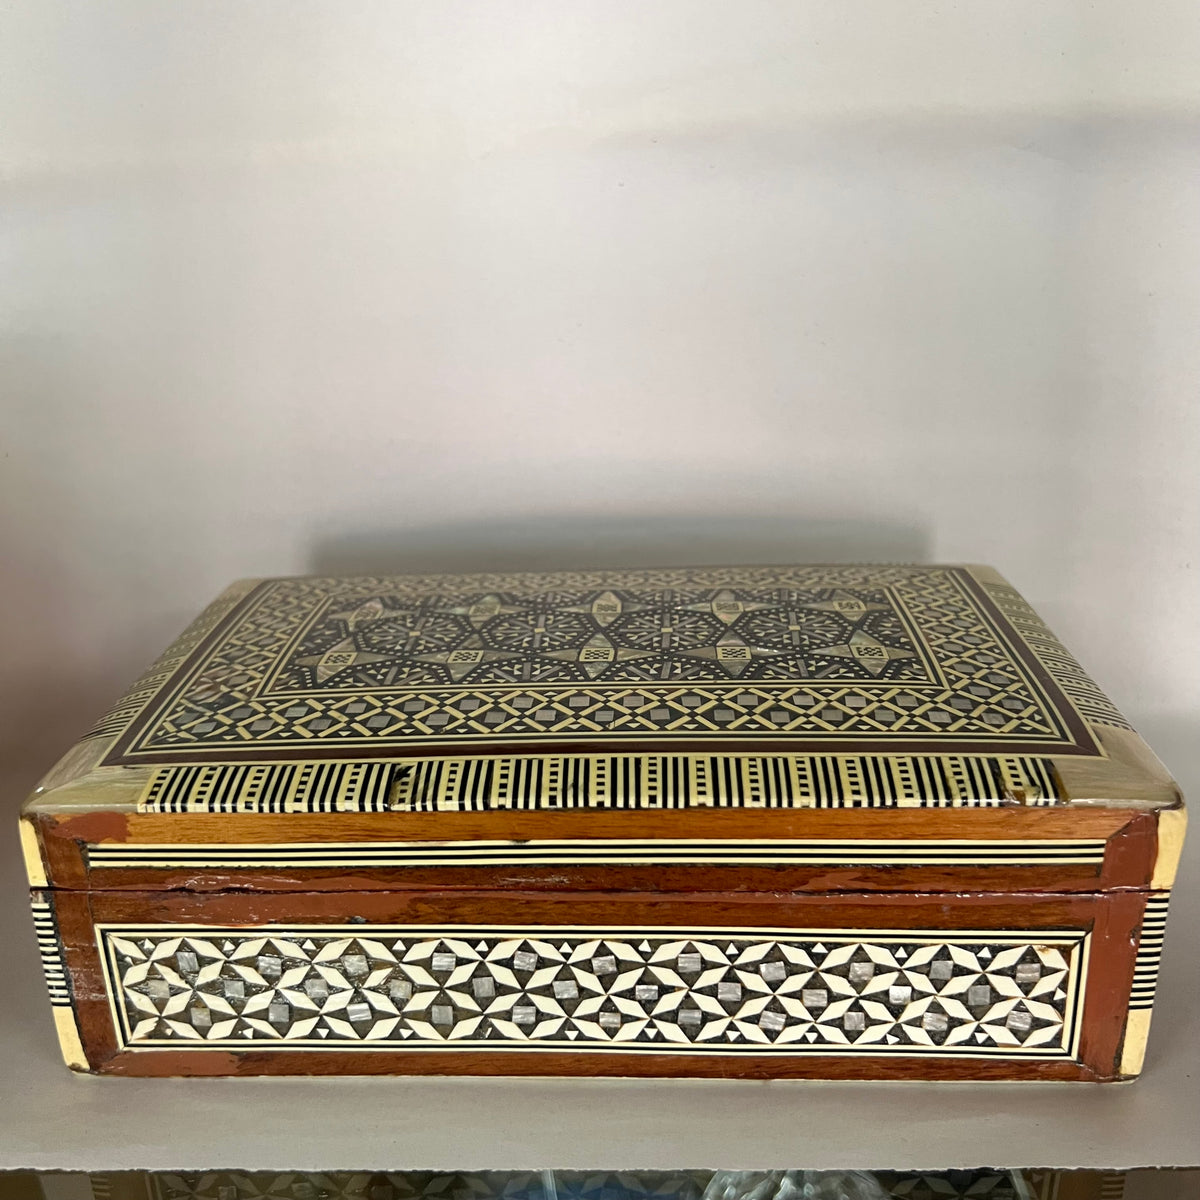 Stunning handcrafted decorative wood box with mosaic marquetry design. Vintage Moorish style box features geometric inlays in mother of pearl 